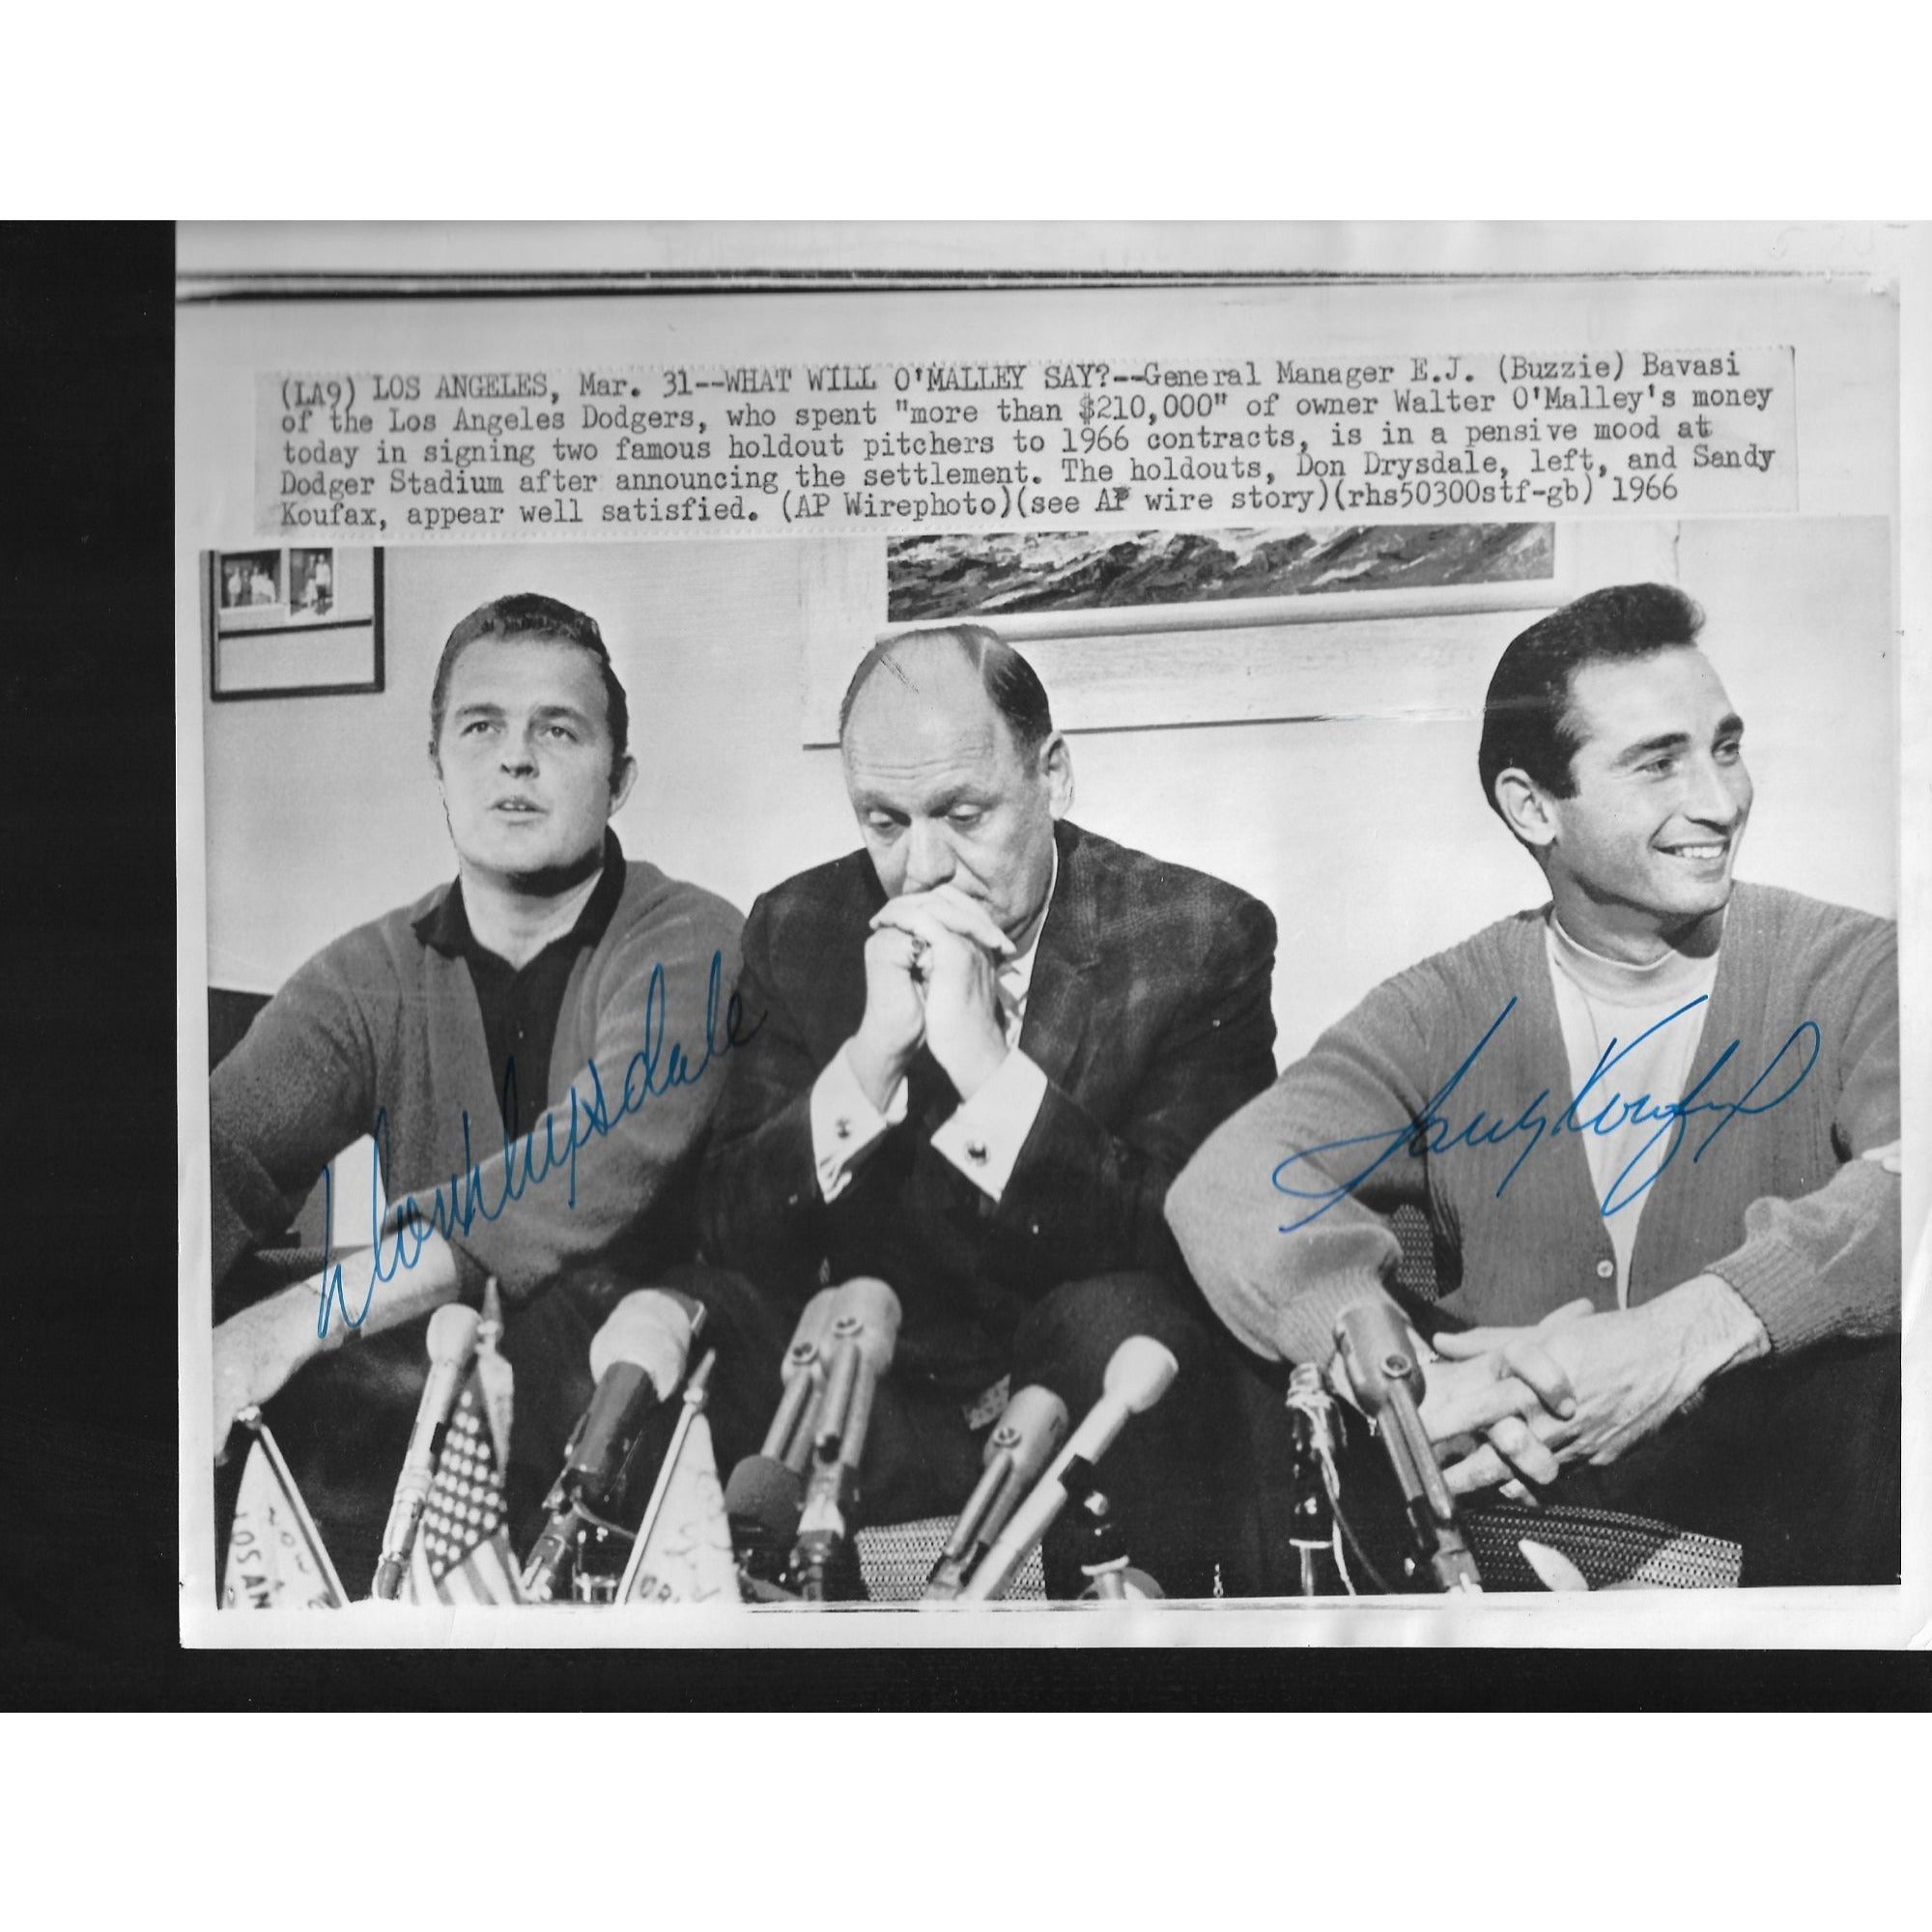 Don Drysdale and Sandy Koufax original wire service photo signed